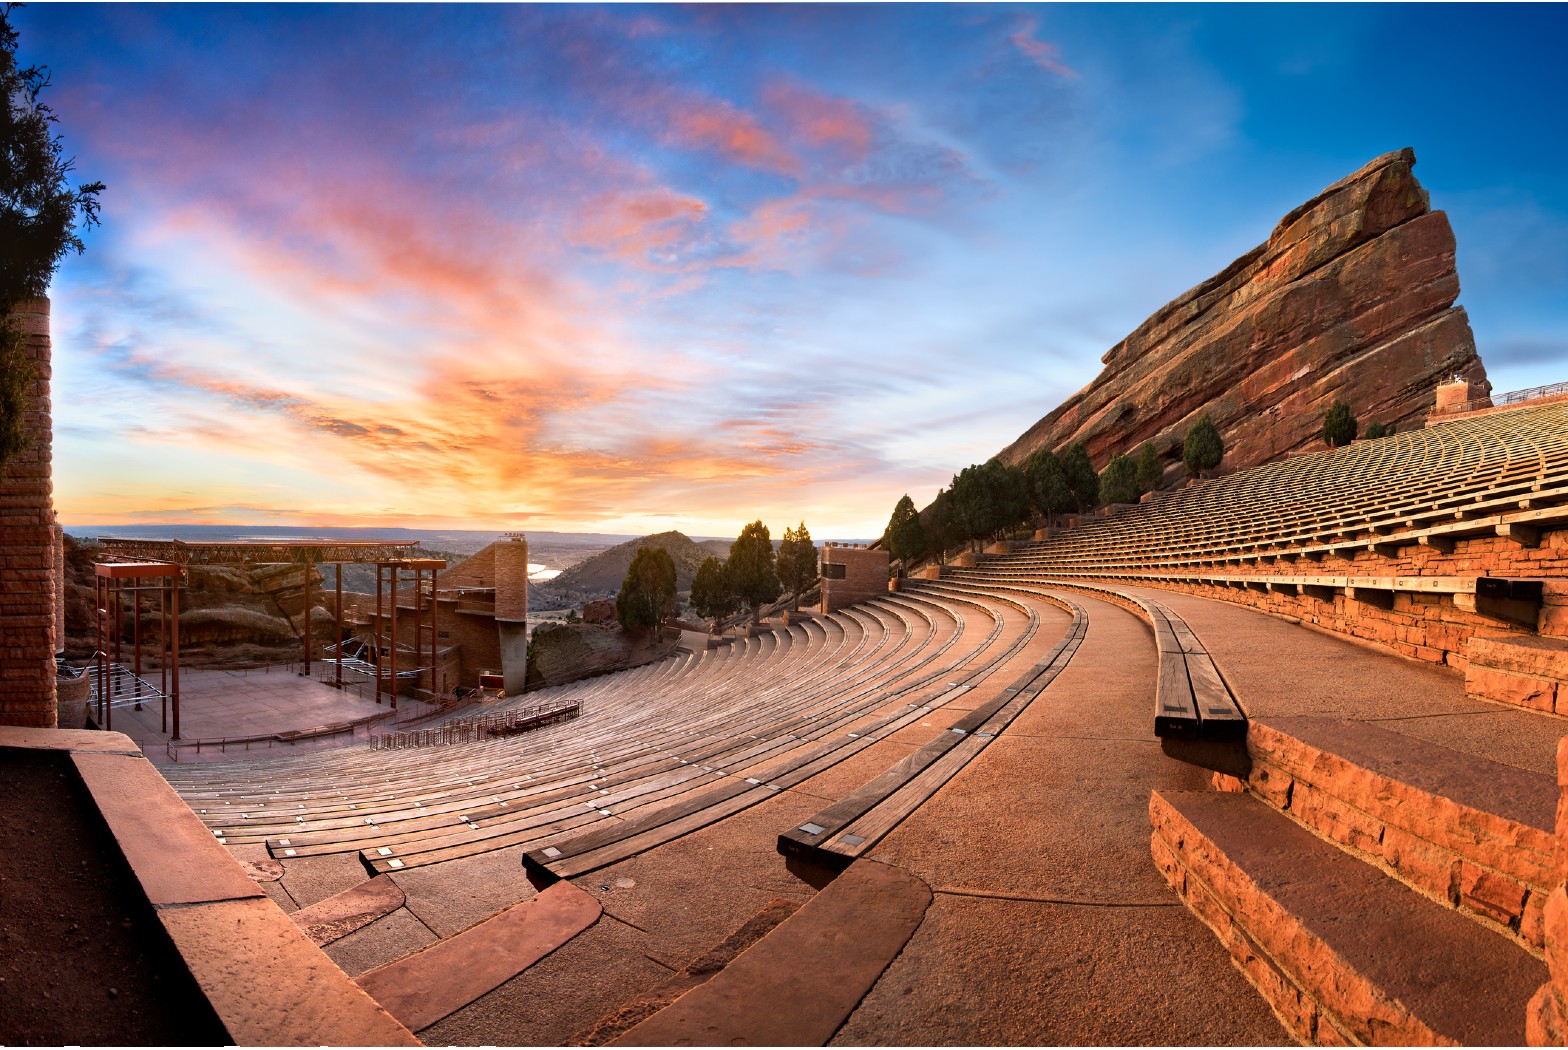 Red Rocks Amphitheater in Colorado at sunset